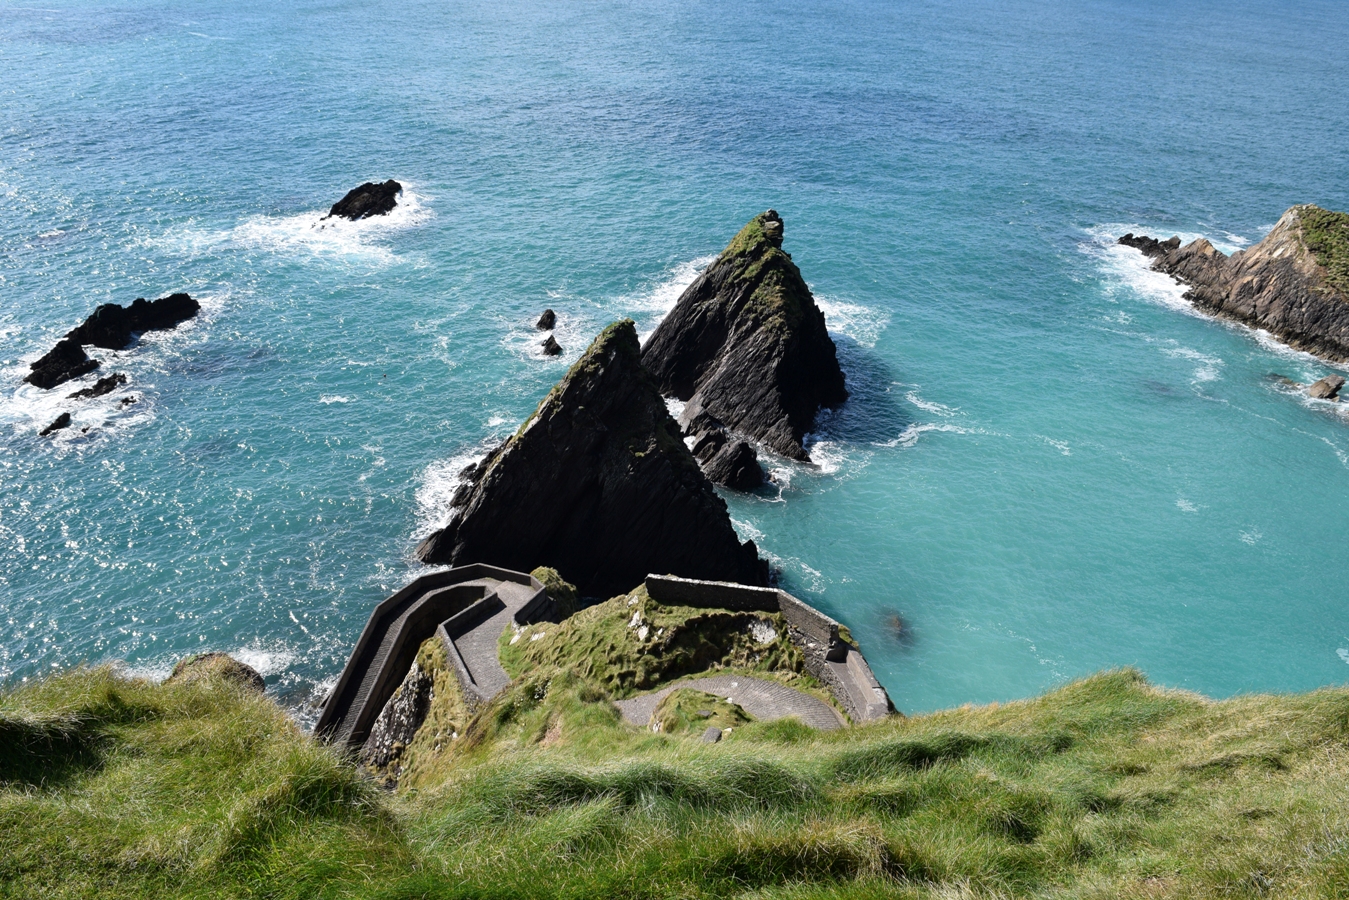 The ultimate 1 week road trip itinerary for Ireland | The Cheerful Wanderer